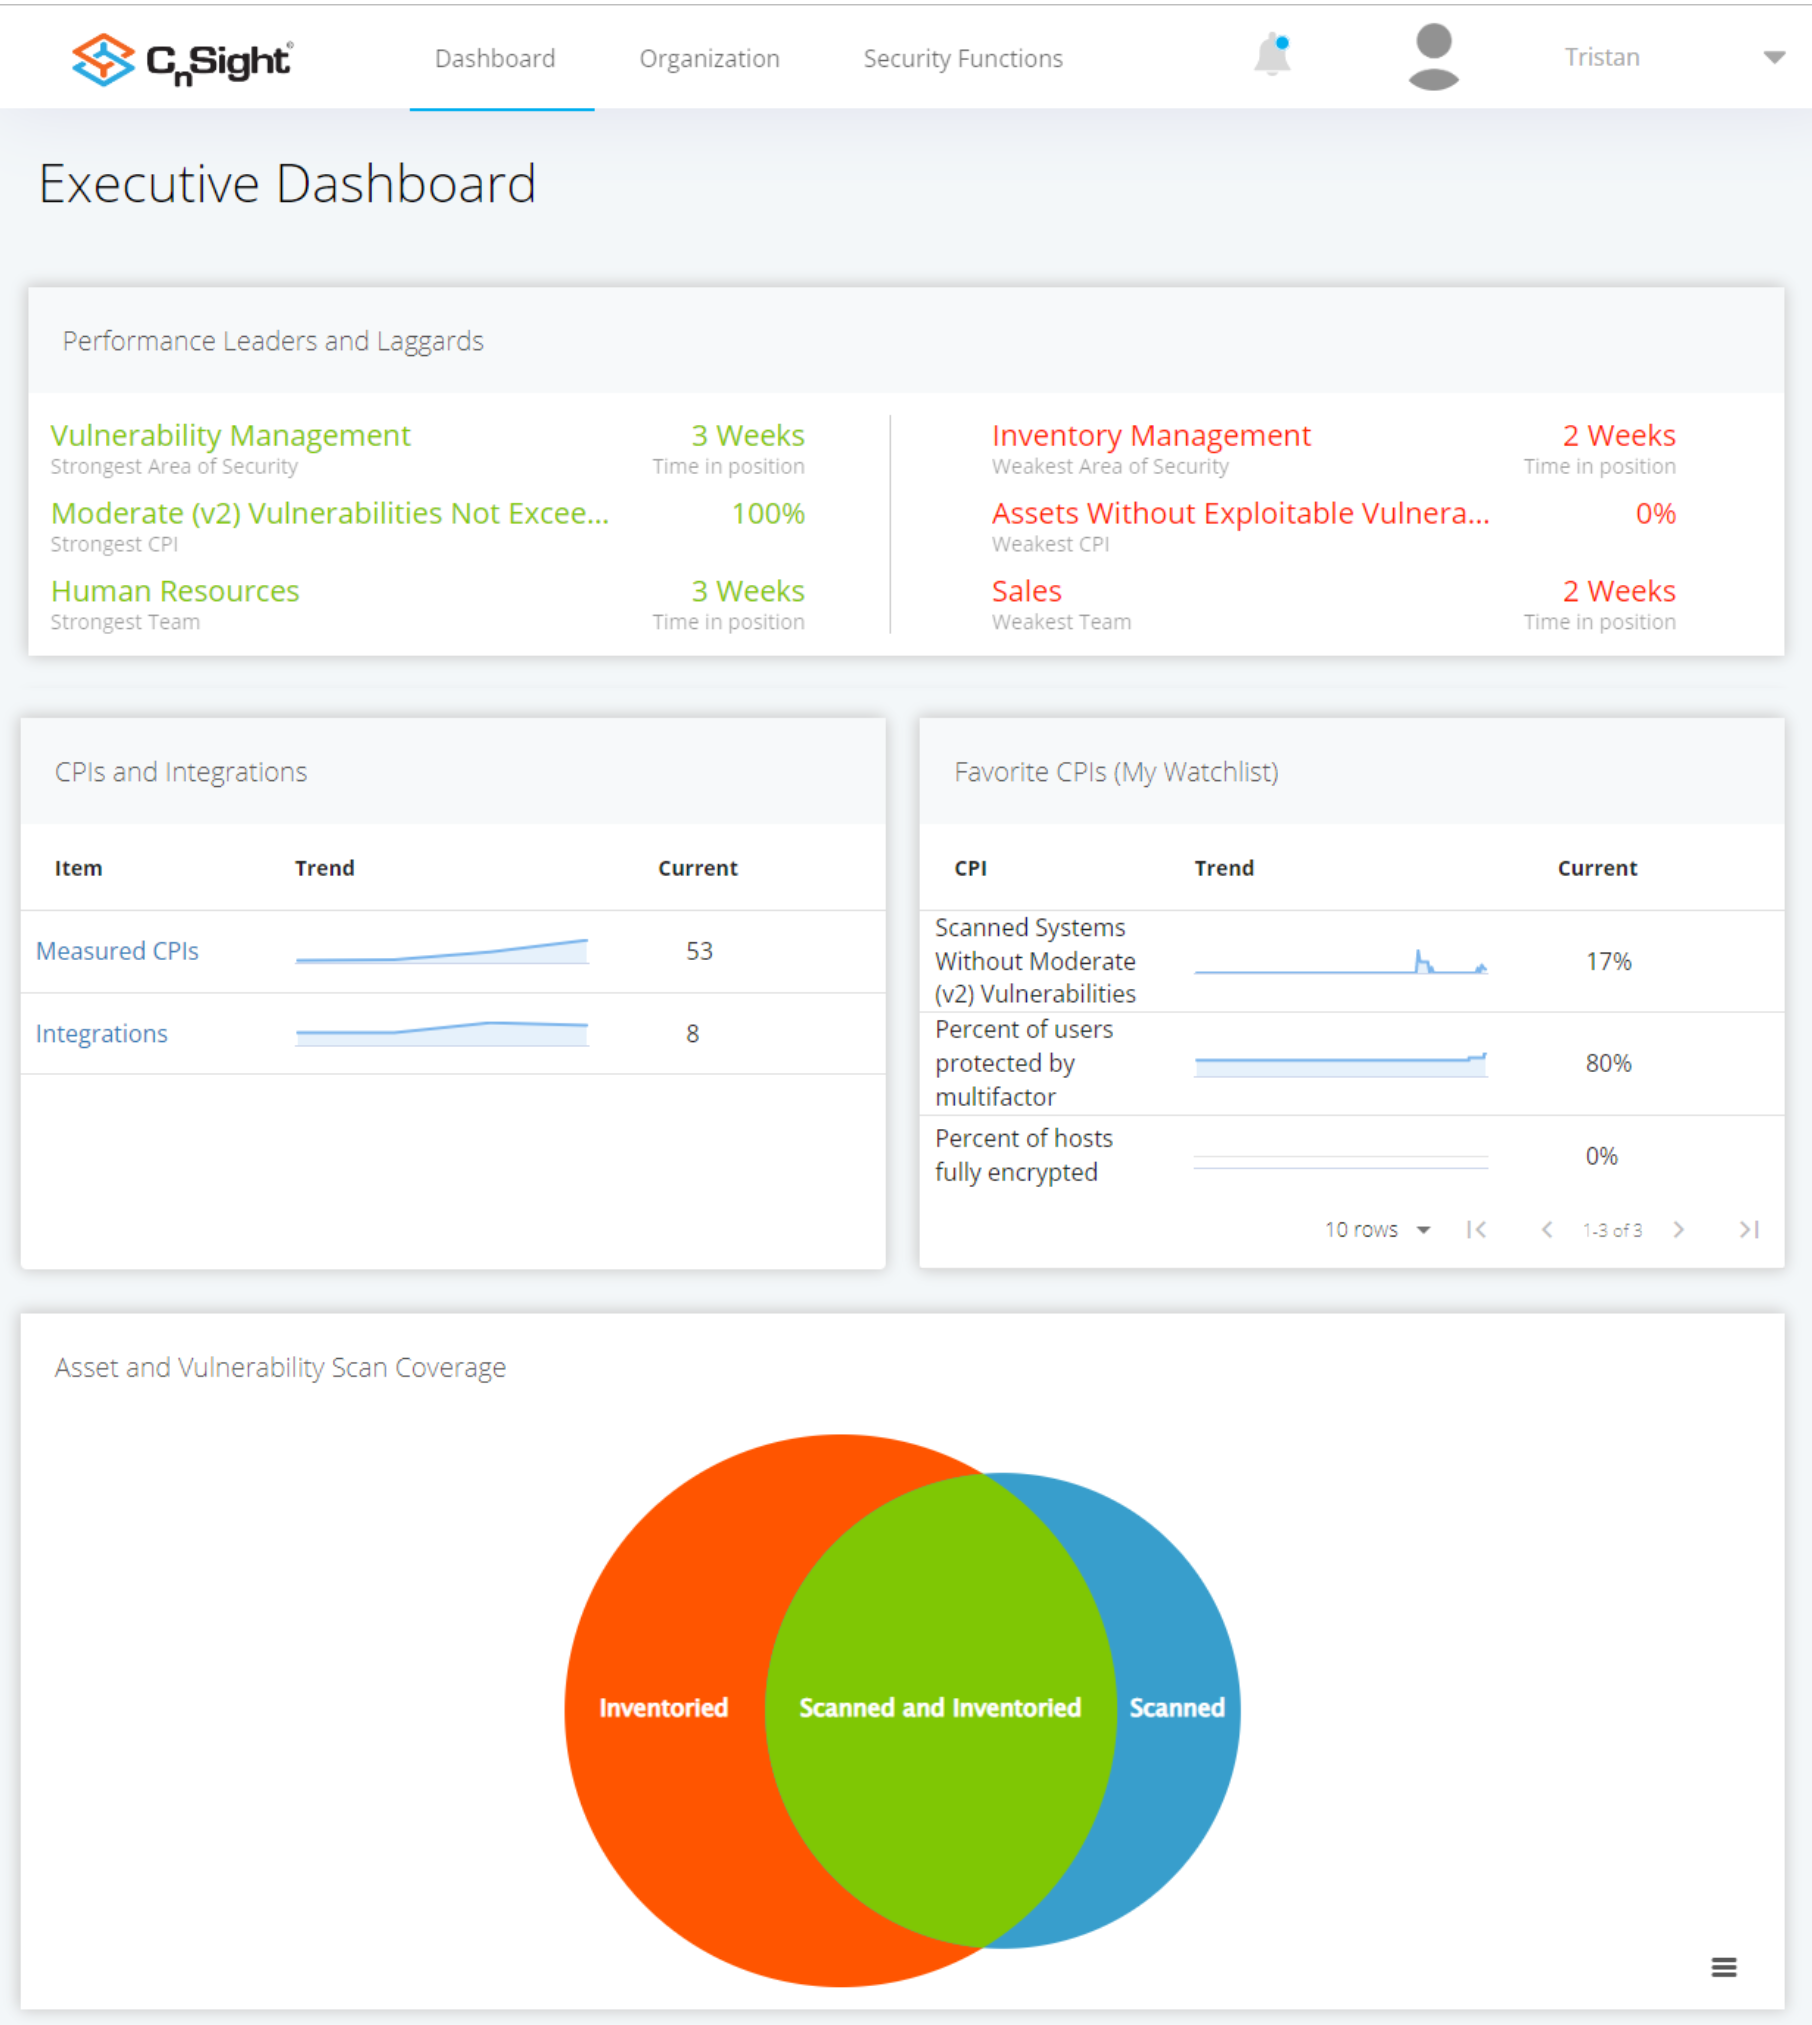 Executive Dashboard of CnSight. Depicts various tables and graphs.